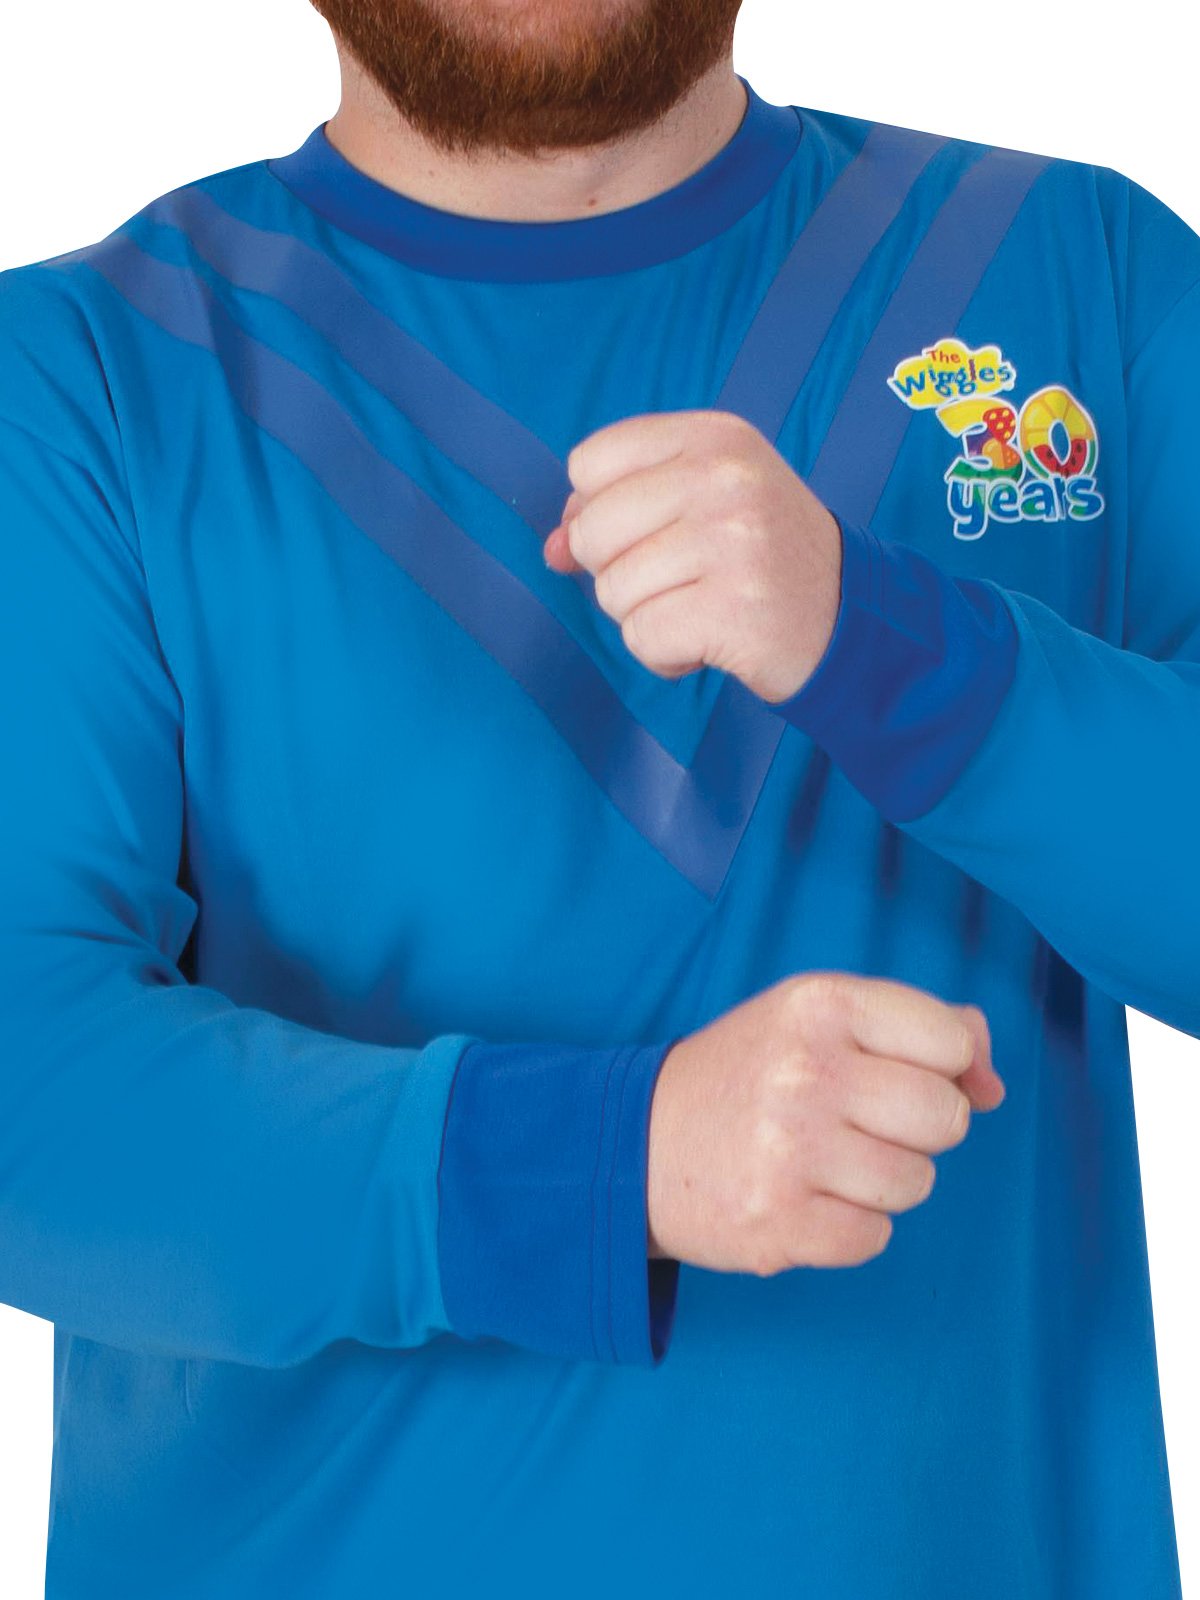 Costume Adult Anthony Wiggle Deluxe Blue Top STD